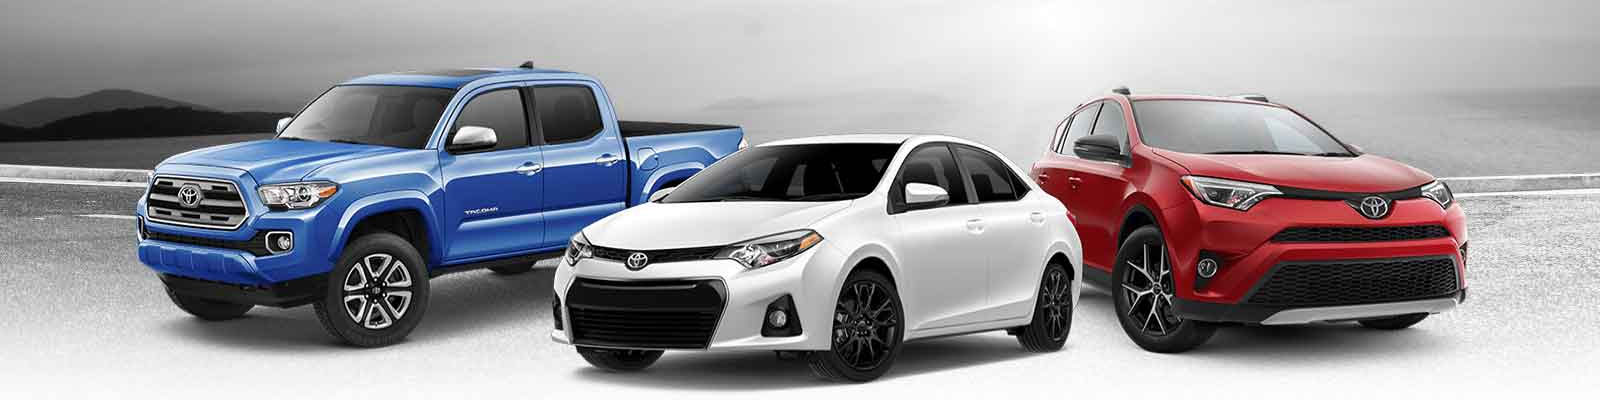 Toyota Cars In India 2020 Upcoming Toyota Cars Price Models